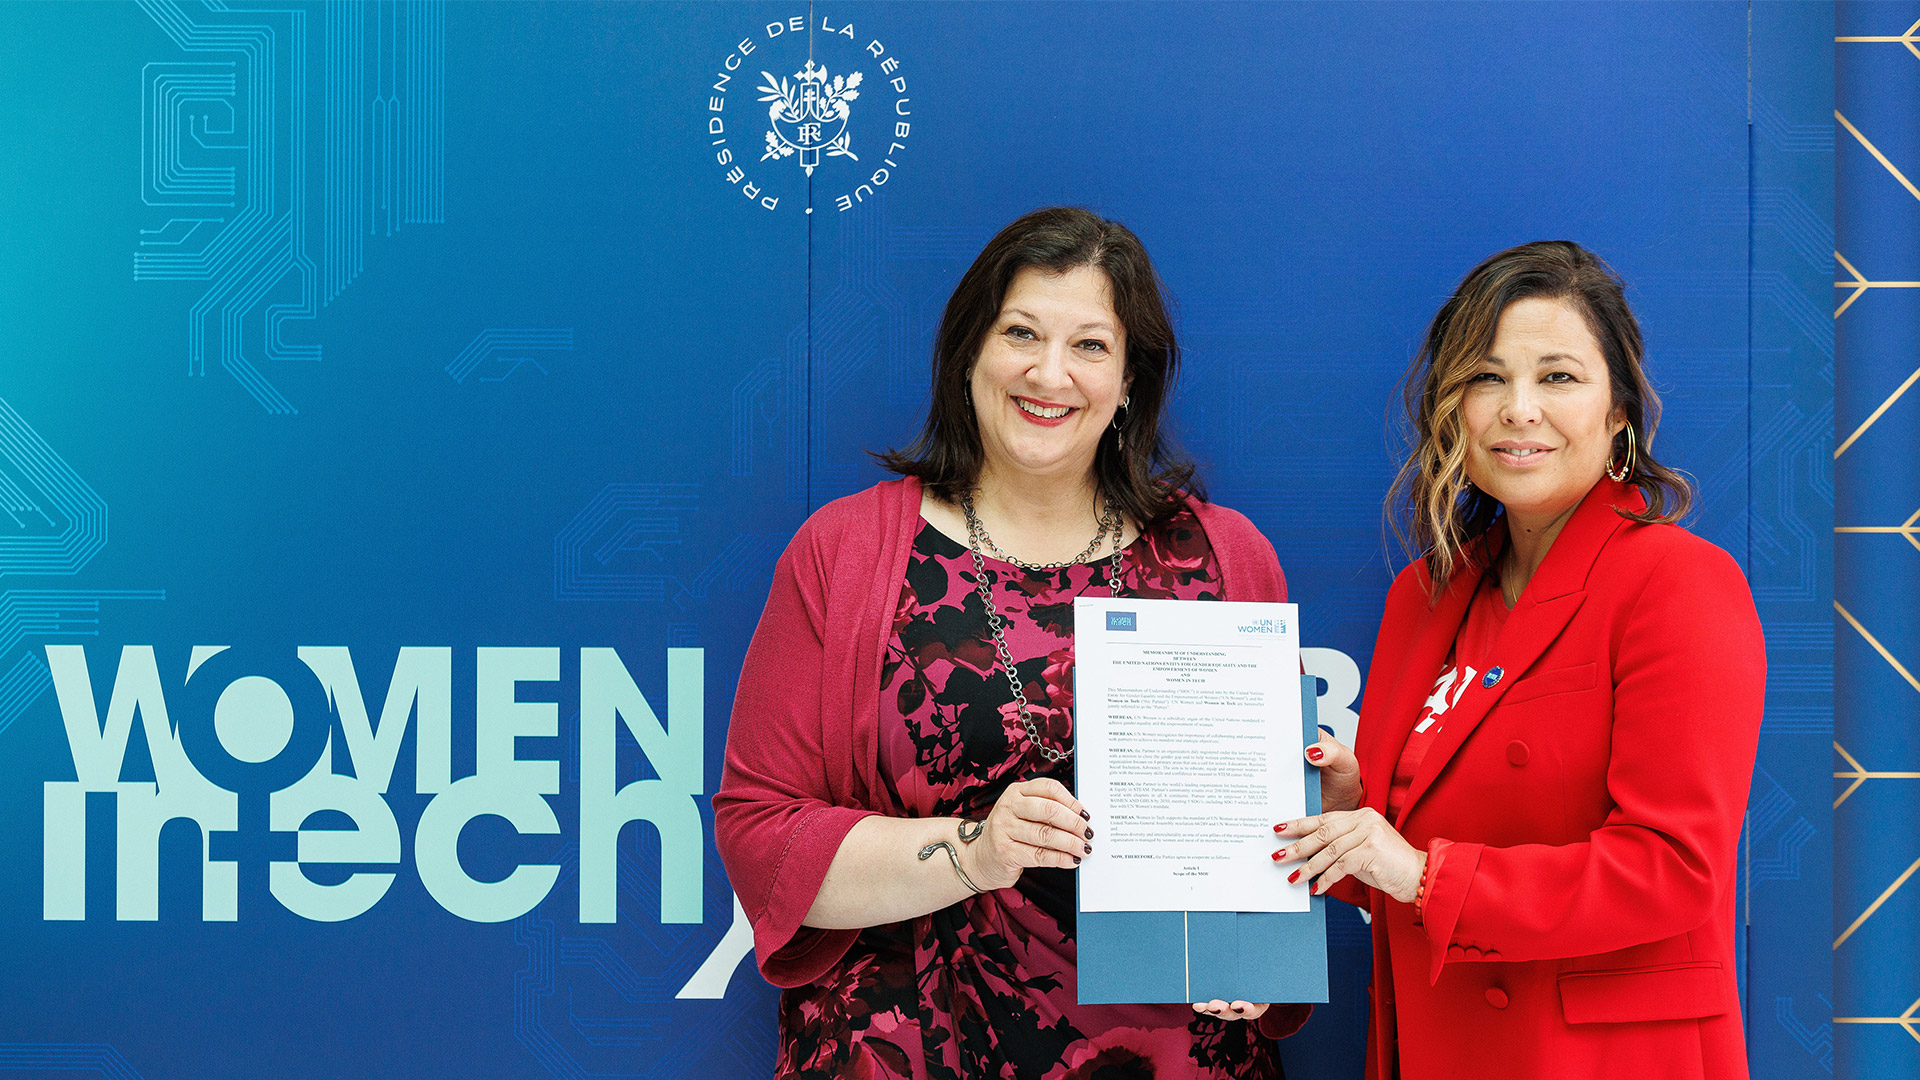 UN Women and Women in Tech partner to empower women and girls in ICT across Europe and Central Asia